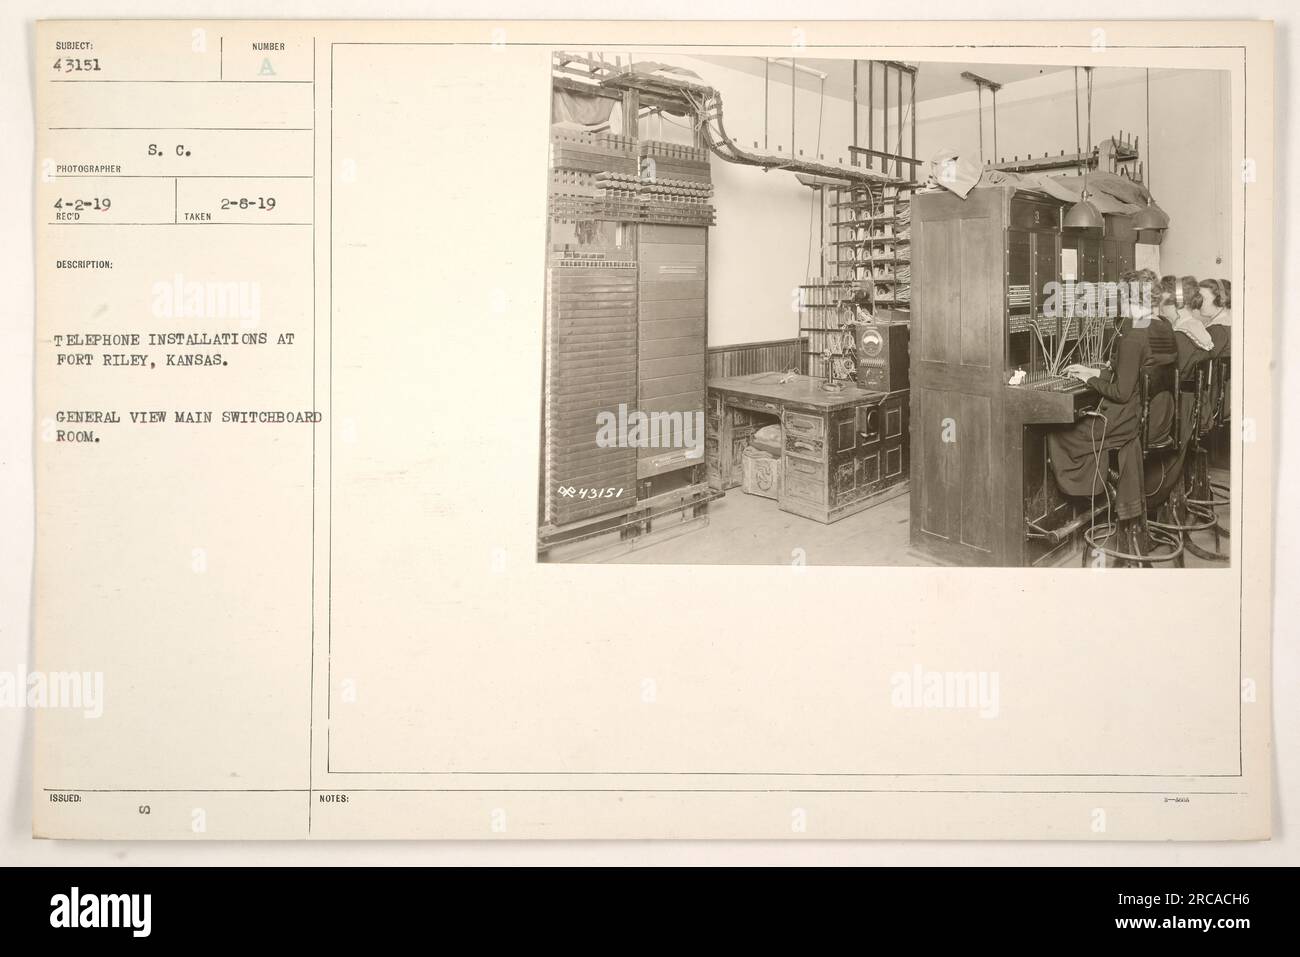 Image shows a general view of the main switchboard room at Fort Riley, Kansas. The photograph was taken on February 8th, 1919, for the purpose of documenting telephone installations provided by the Signal Corps. This photo is part of the collection titled 'Photographs of American Military Activities during World War One.' Stock Photo